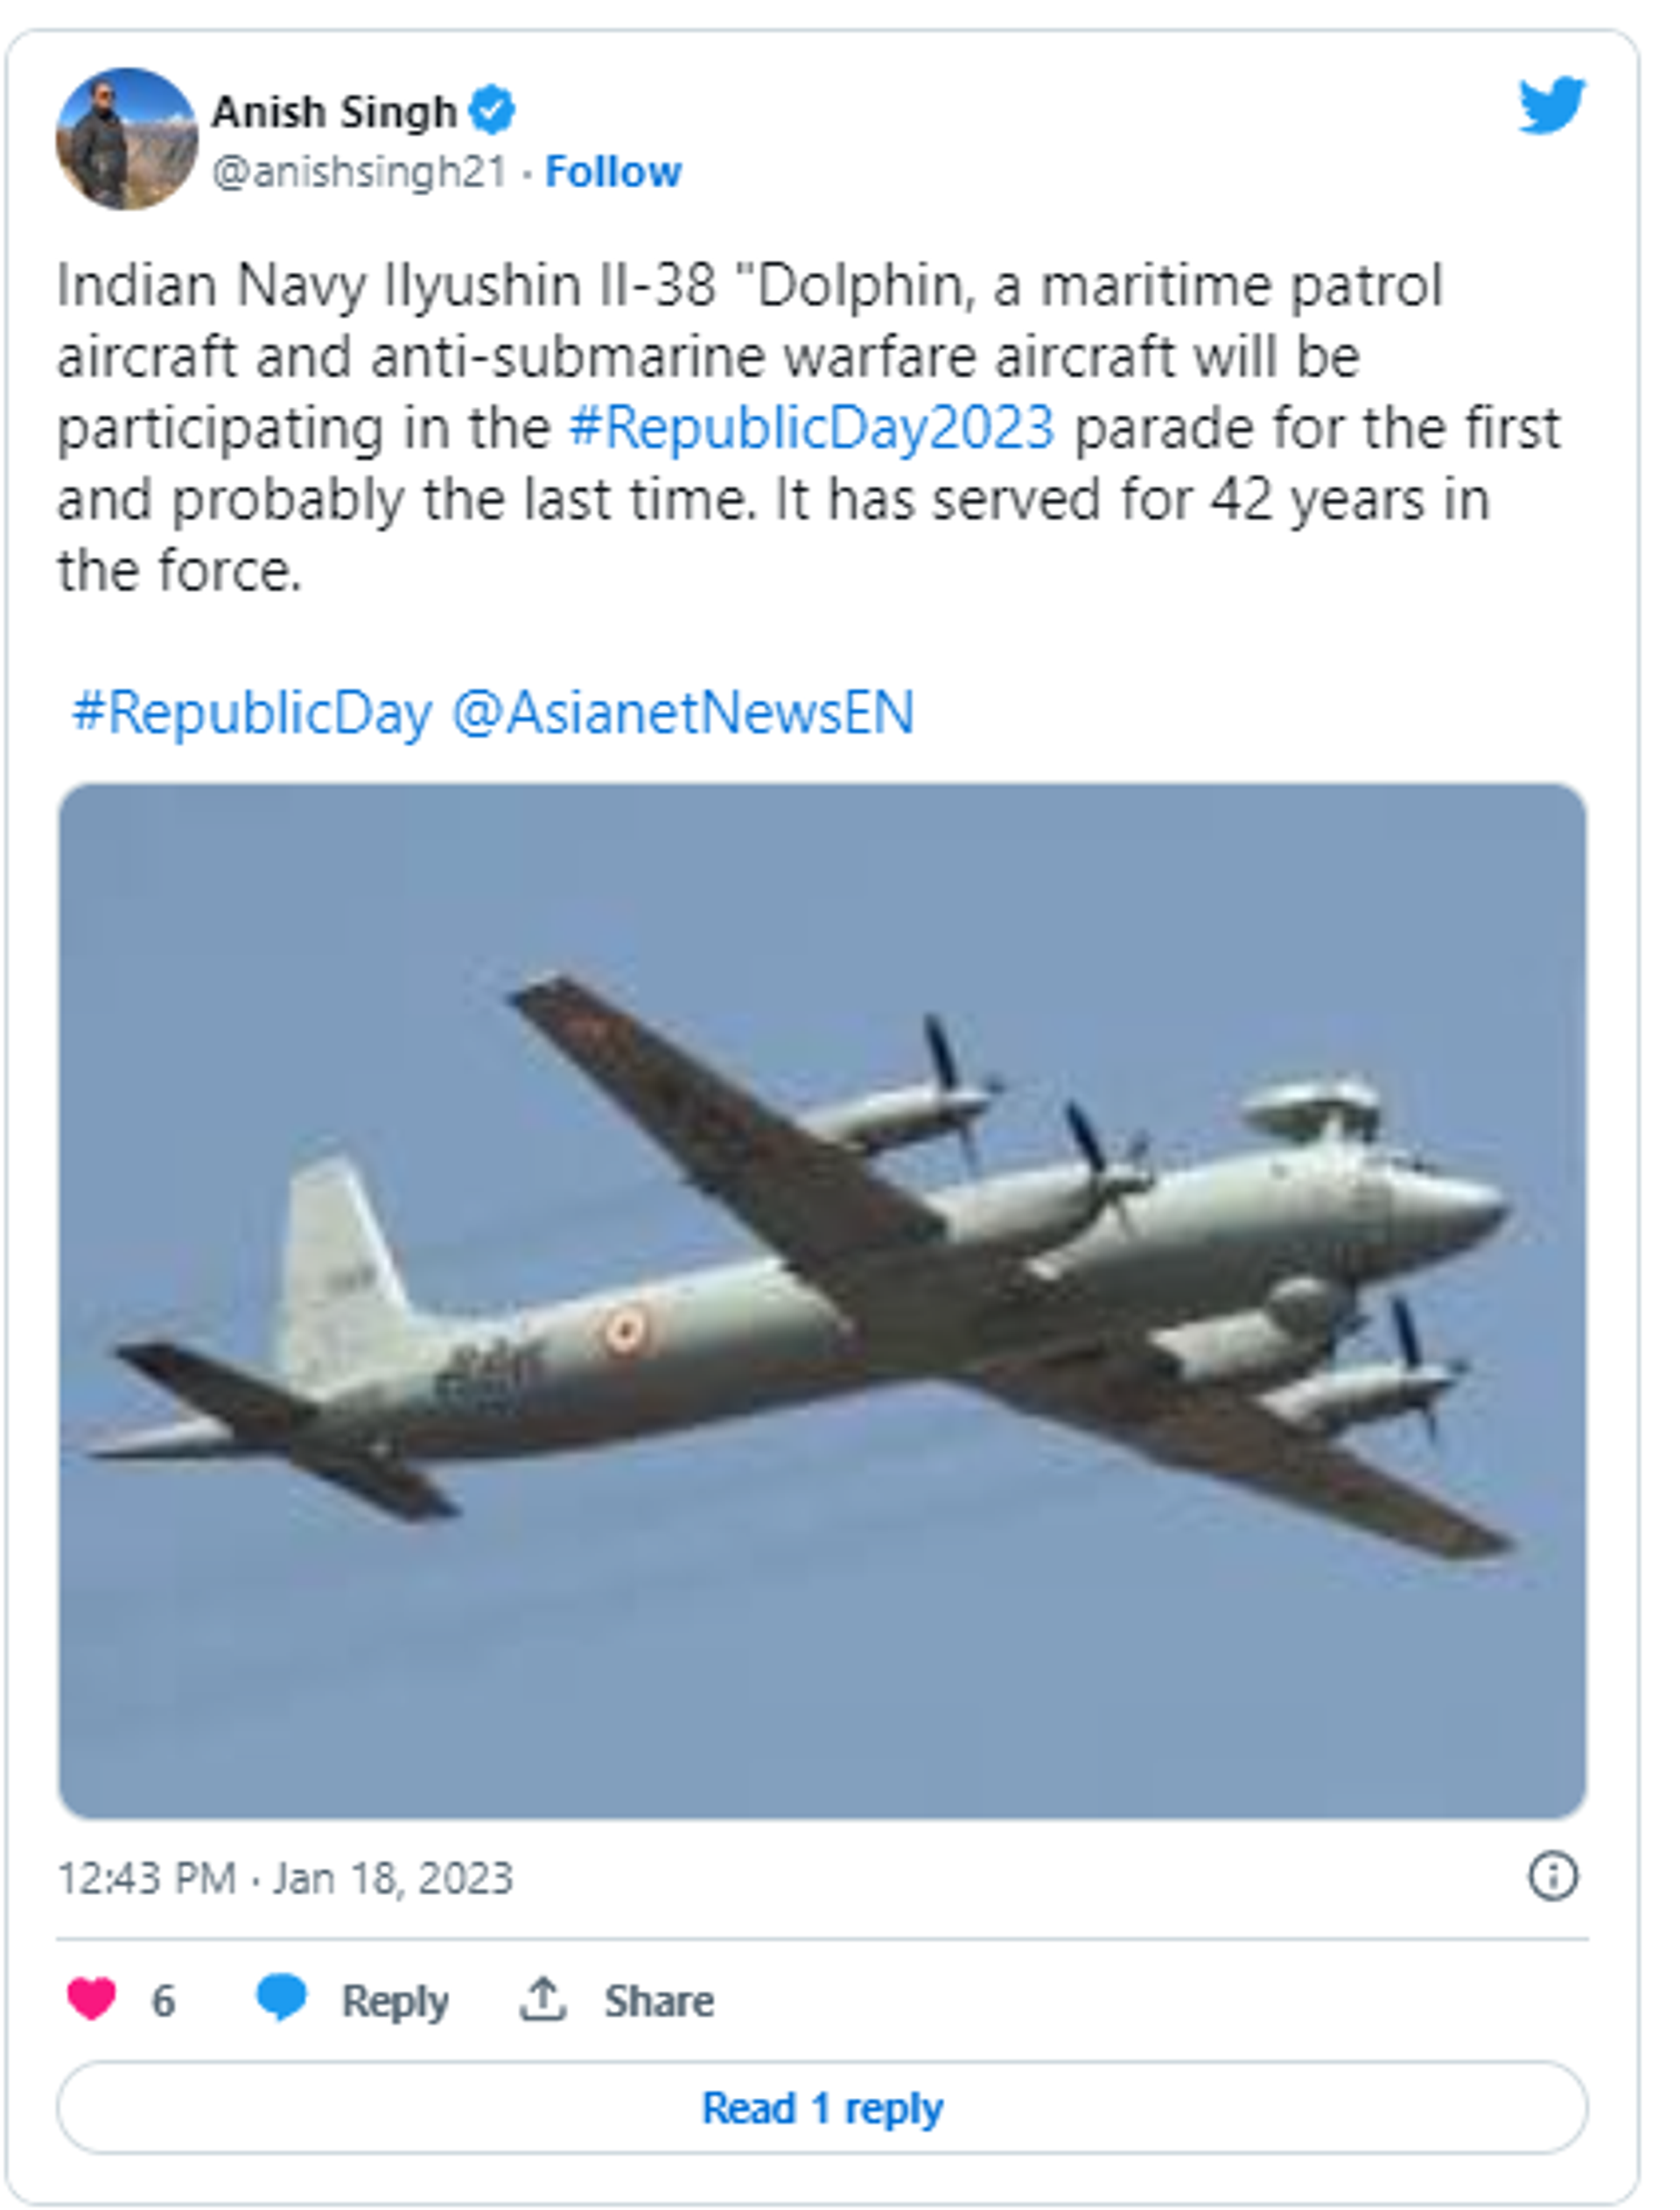 Indian Navy's IL-38 maritime reconnaissance aircraft will be flying over for the first and last time during the Republic Day parade at Kartavya Path in Delhi - Sputnik India, 1920, 18.01.2023